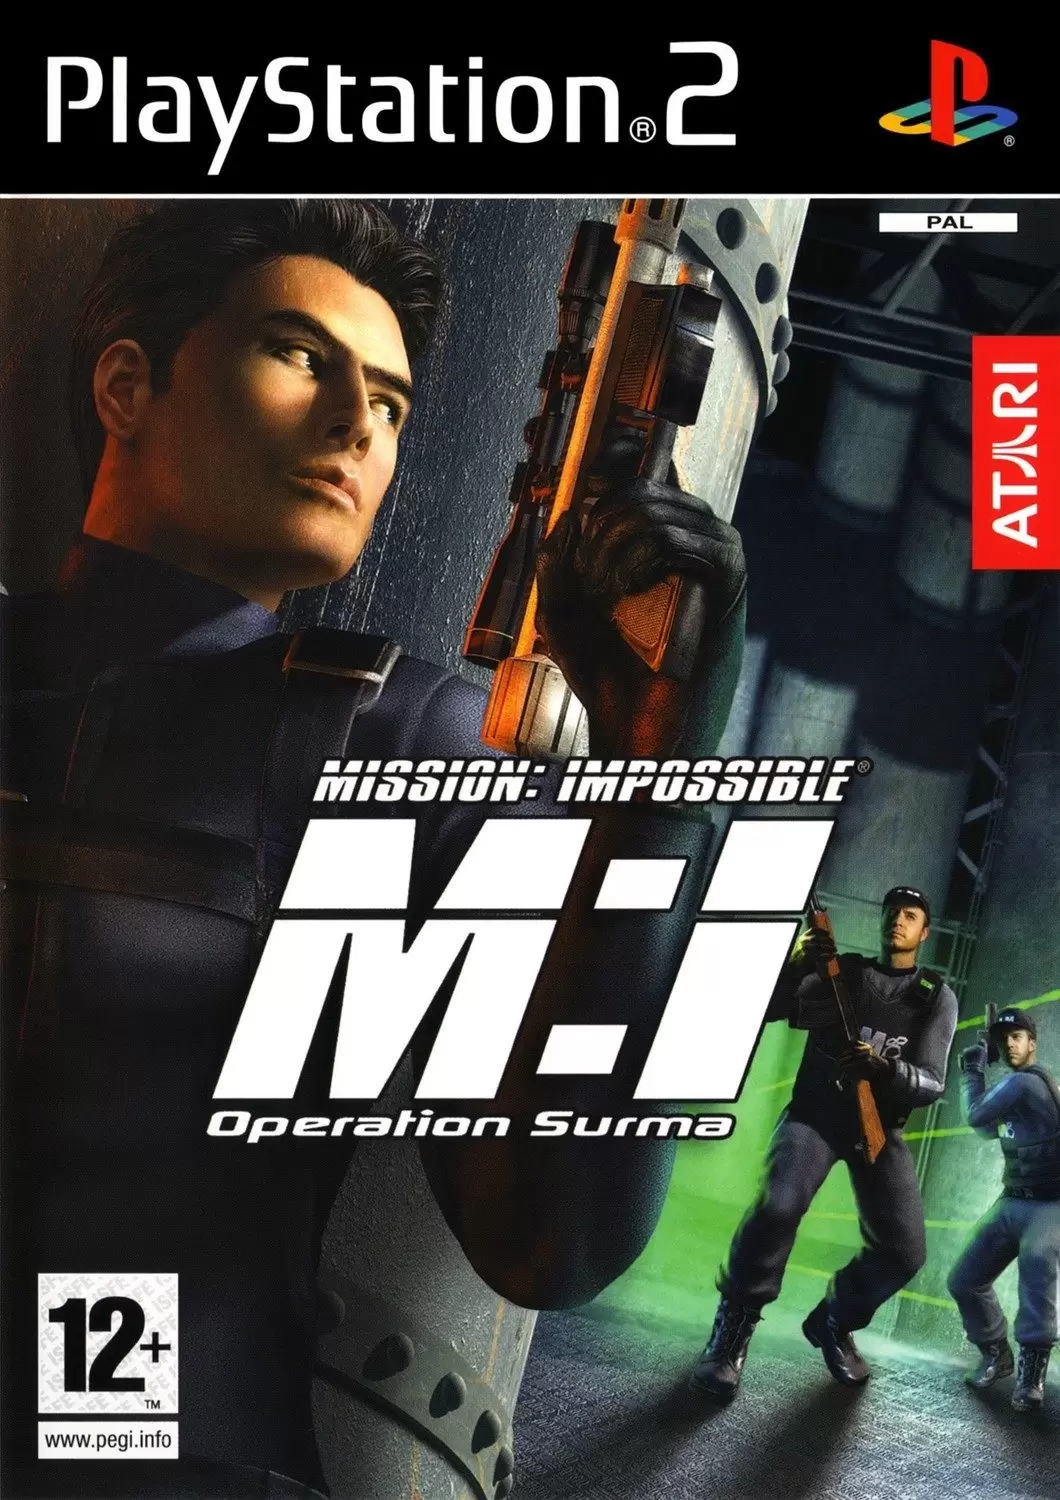 PS2 Games - Mission: Impossible – Operation Surma